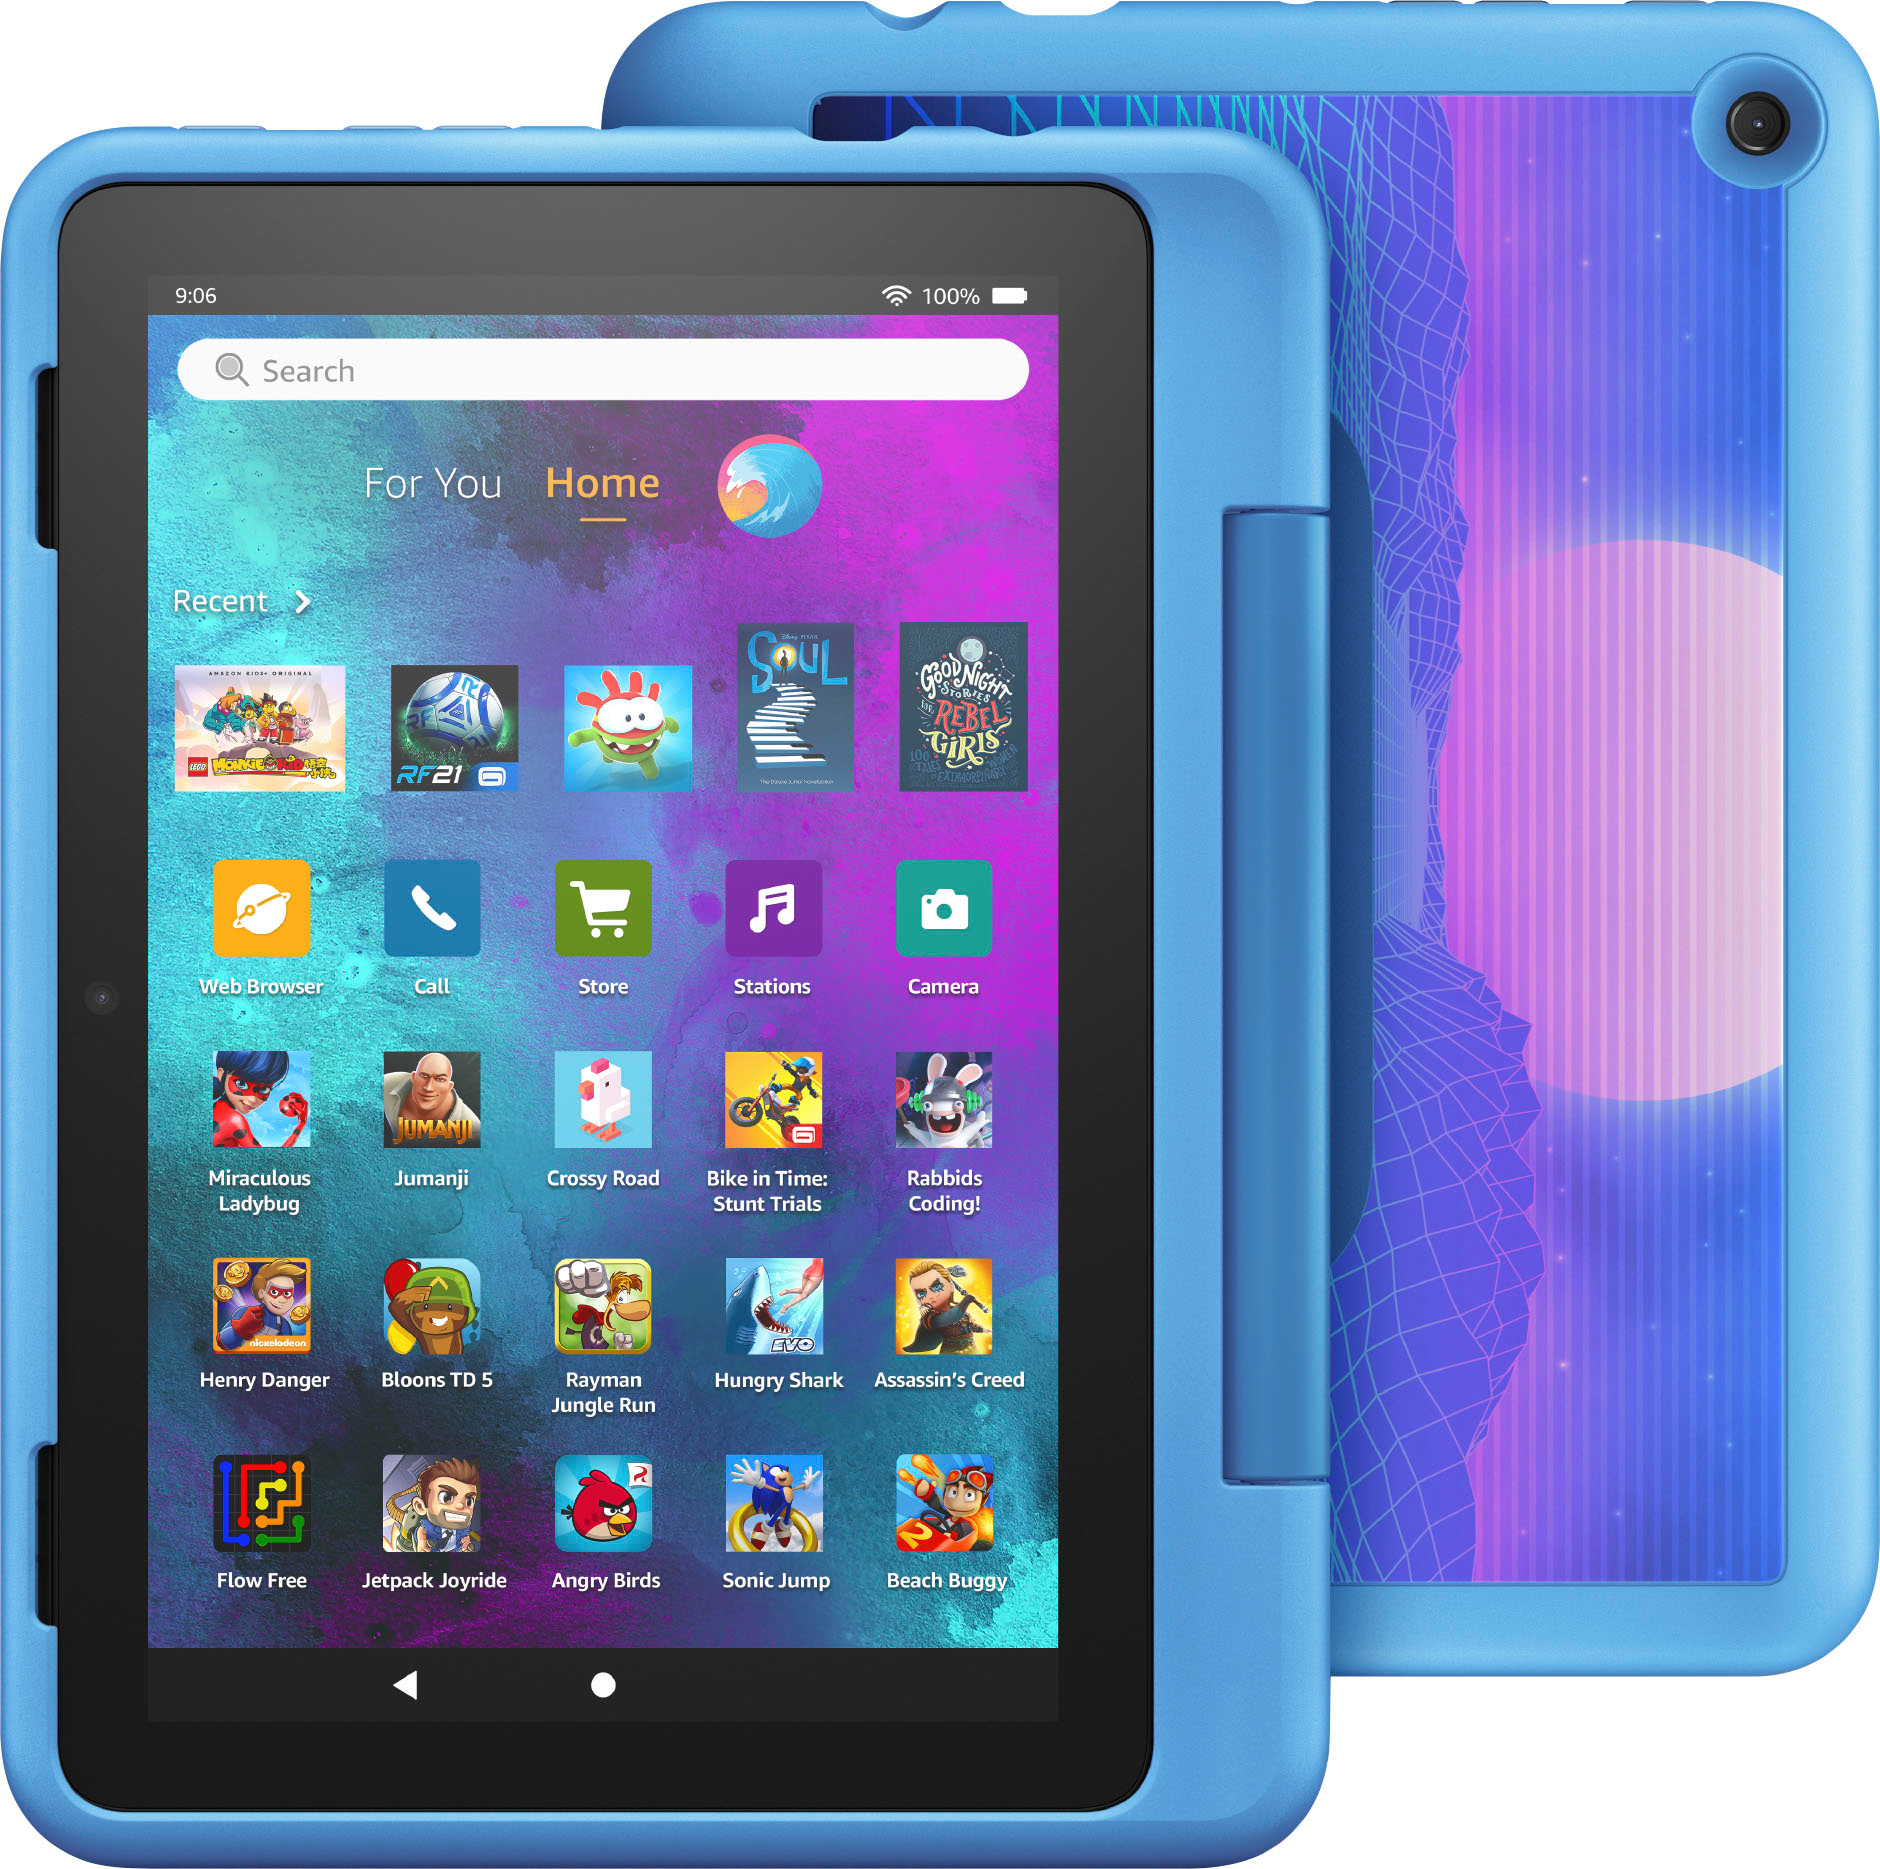 Win  Fire HD 8 kids edition tablet with Poki games worth £129.99